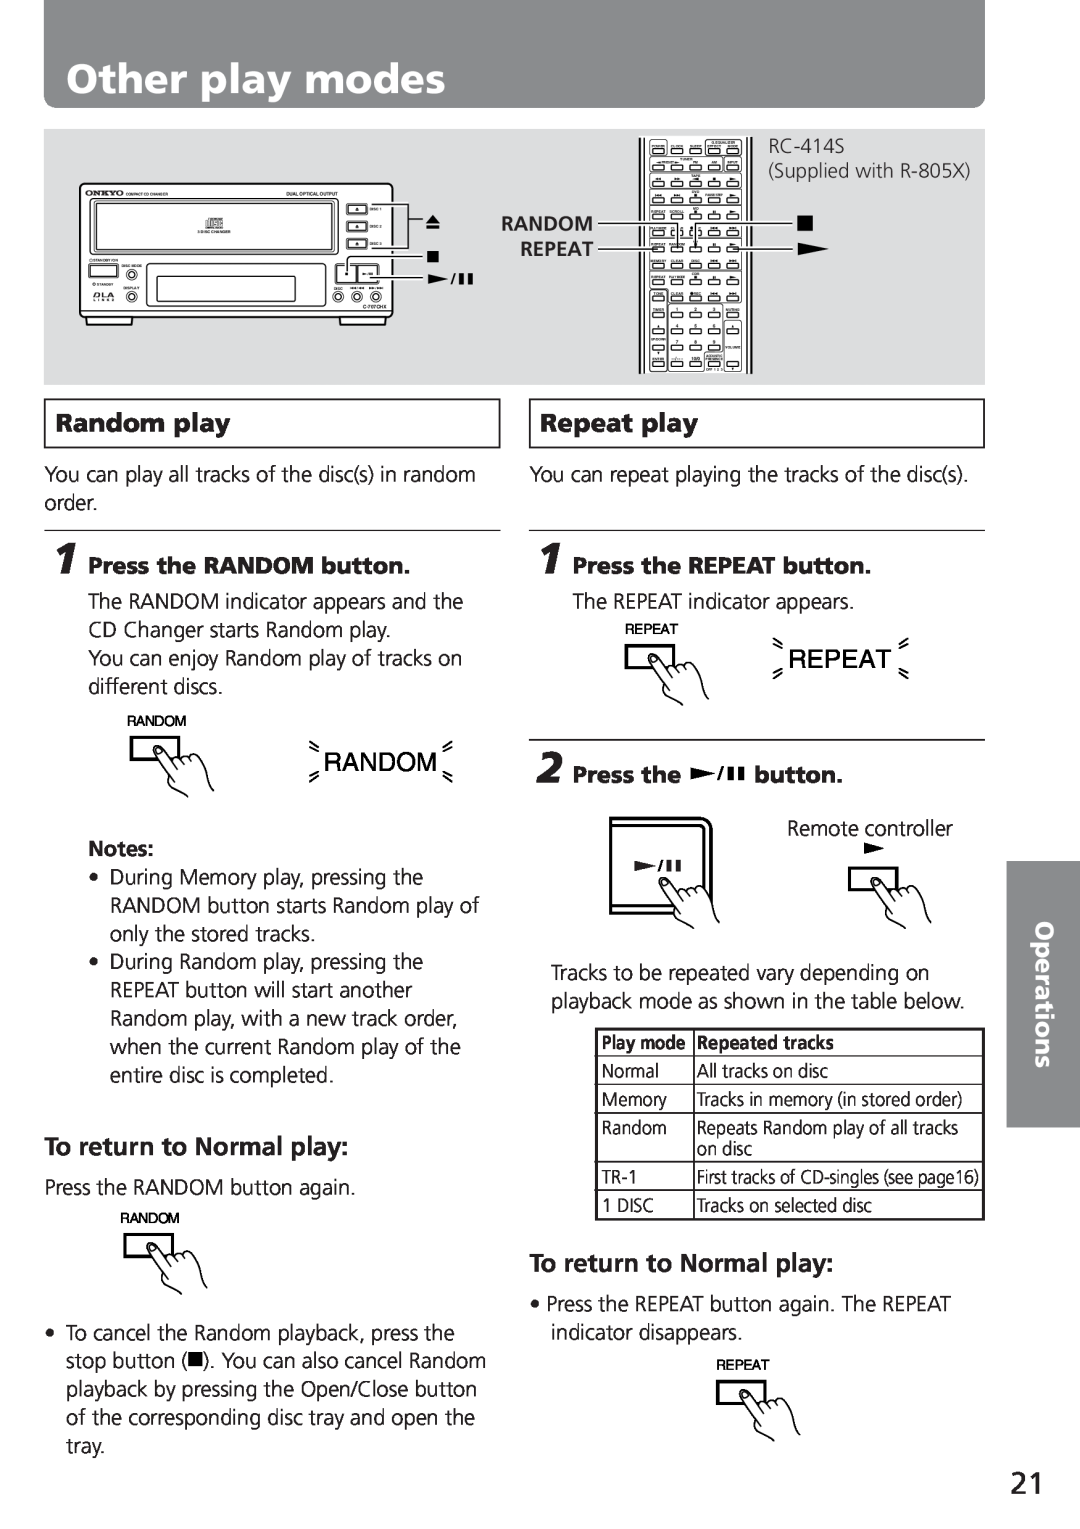 Onkyo C-707CHX instruction manual Other play modes, Random play, Repeat play, To return to Normal play, Operations 